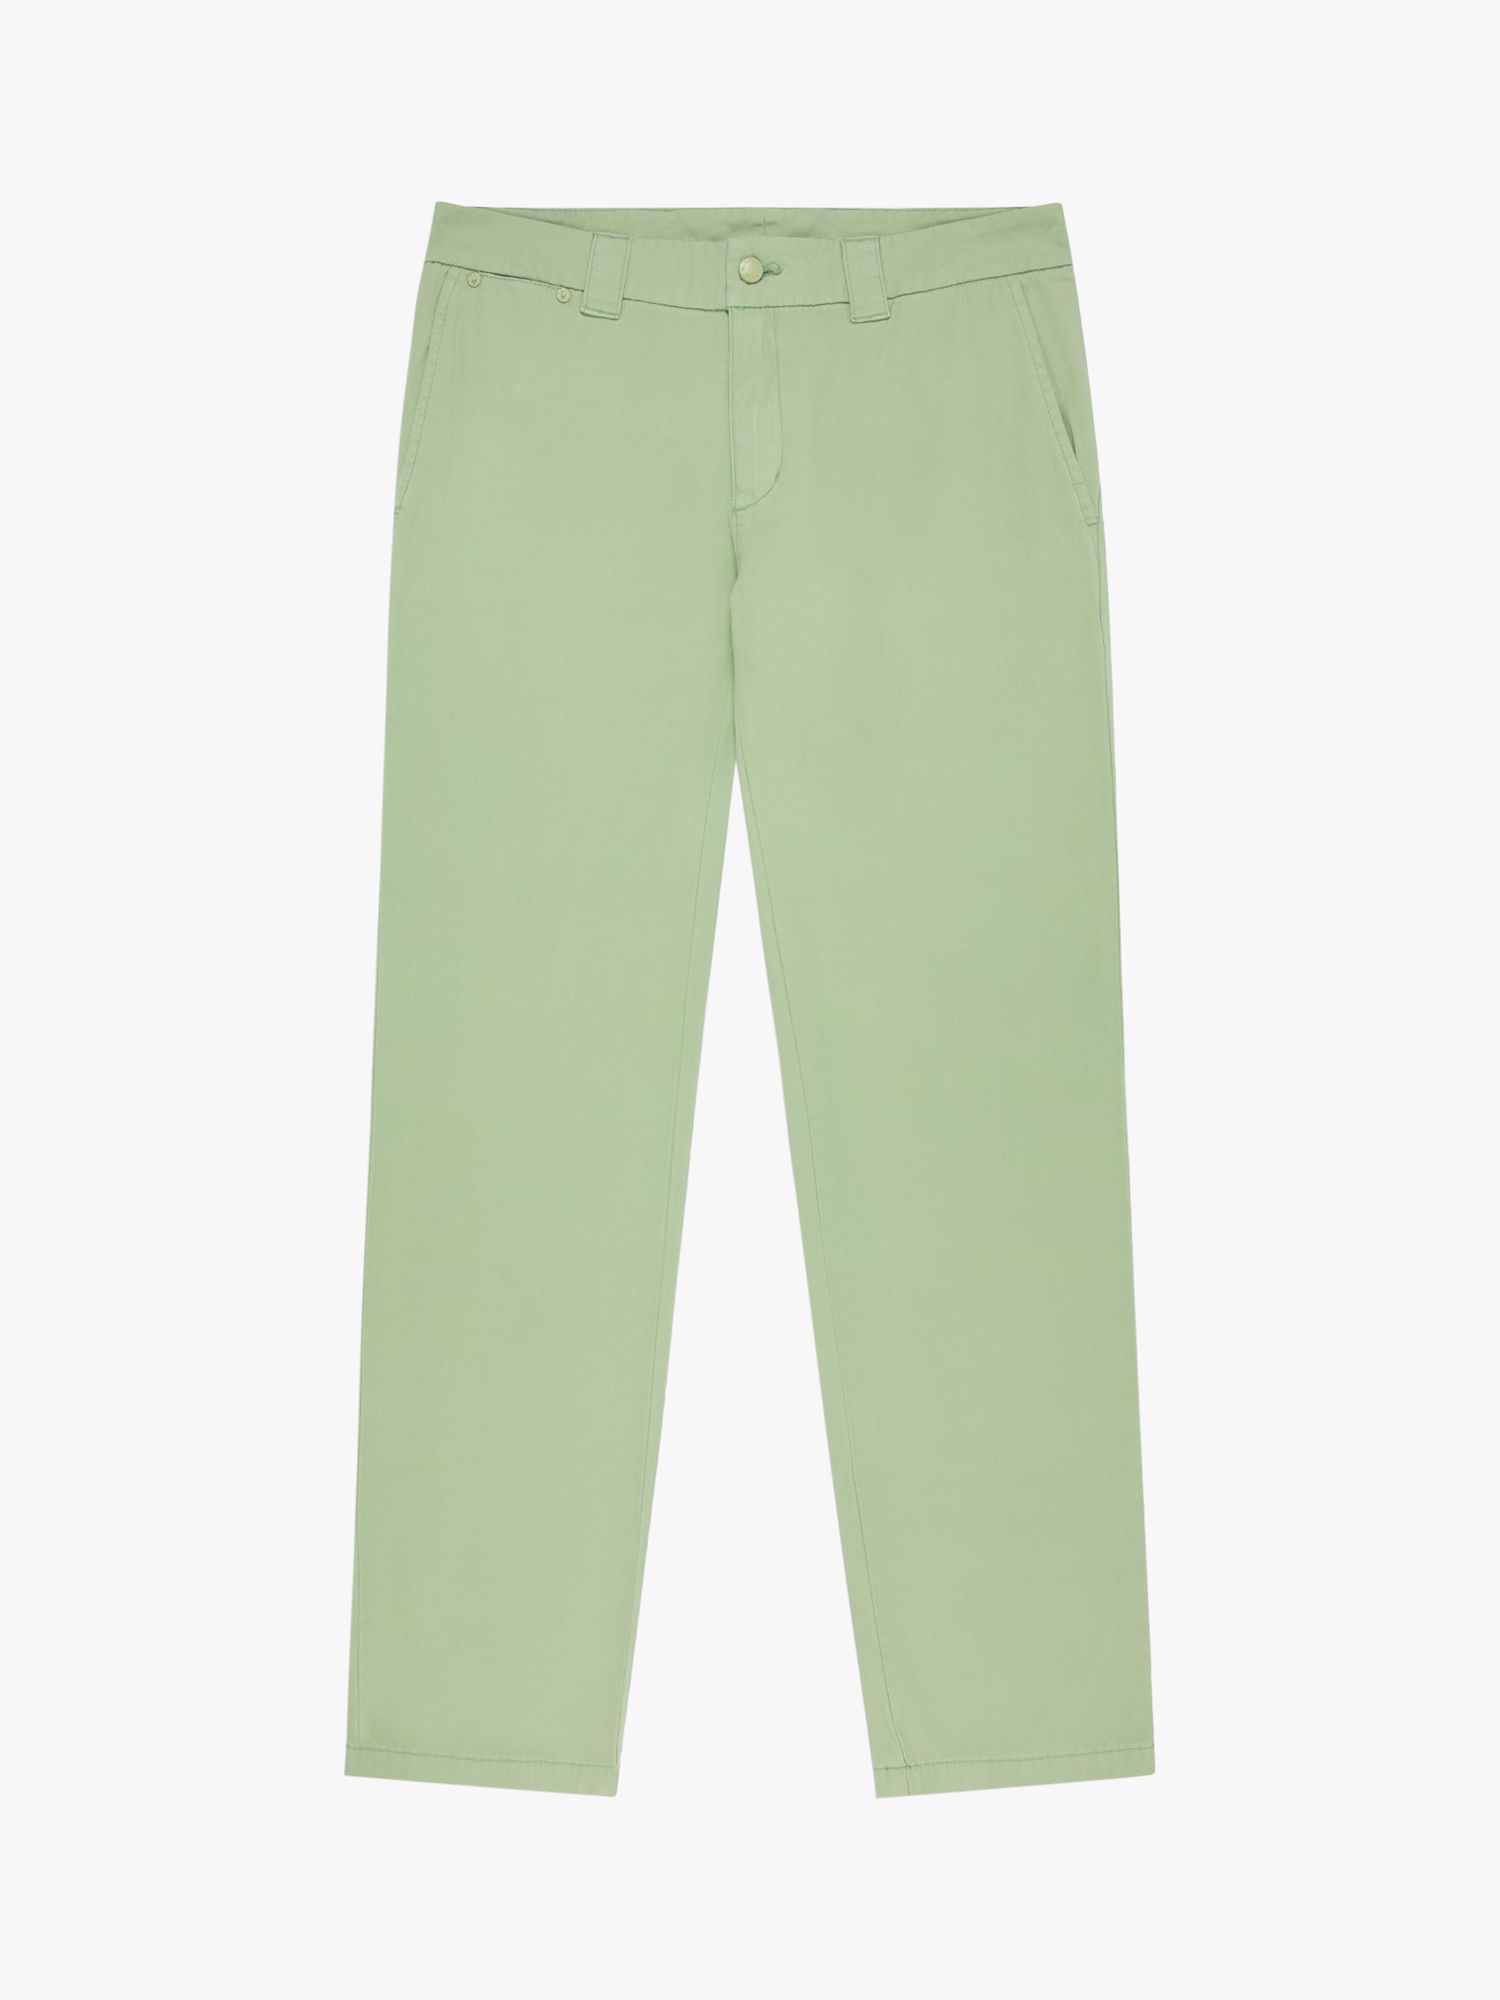 Buy M.C.Overalls Slim Fit Lightweight Cotton Trousers Online at johnlewis.com